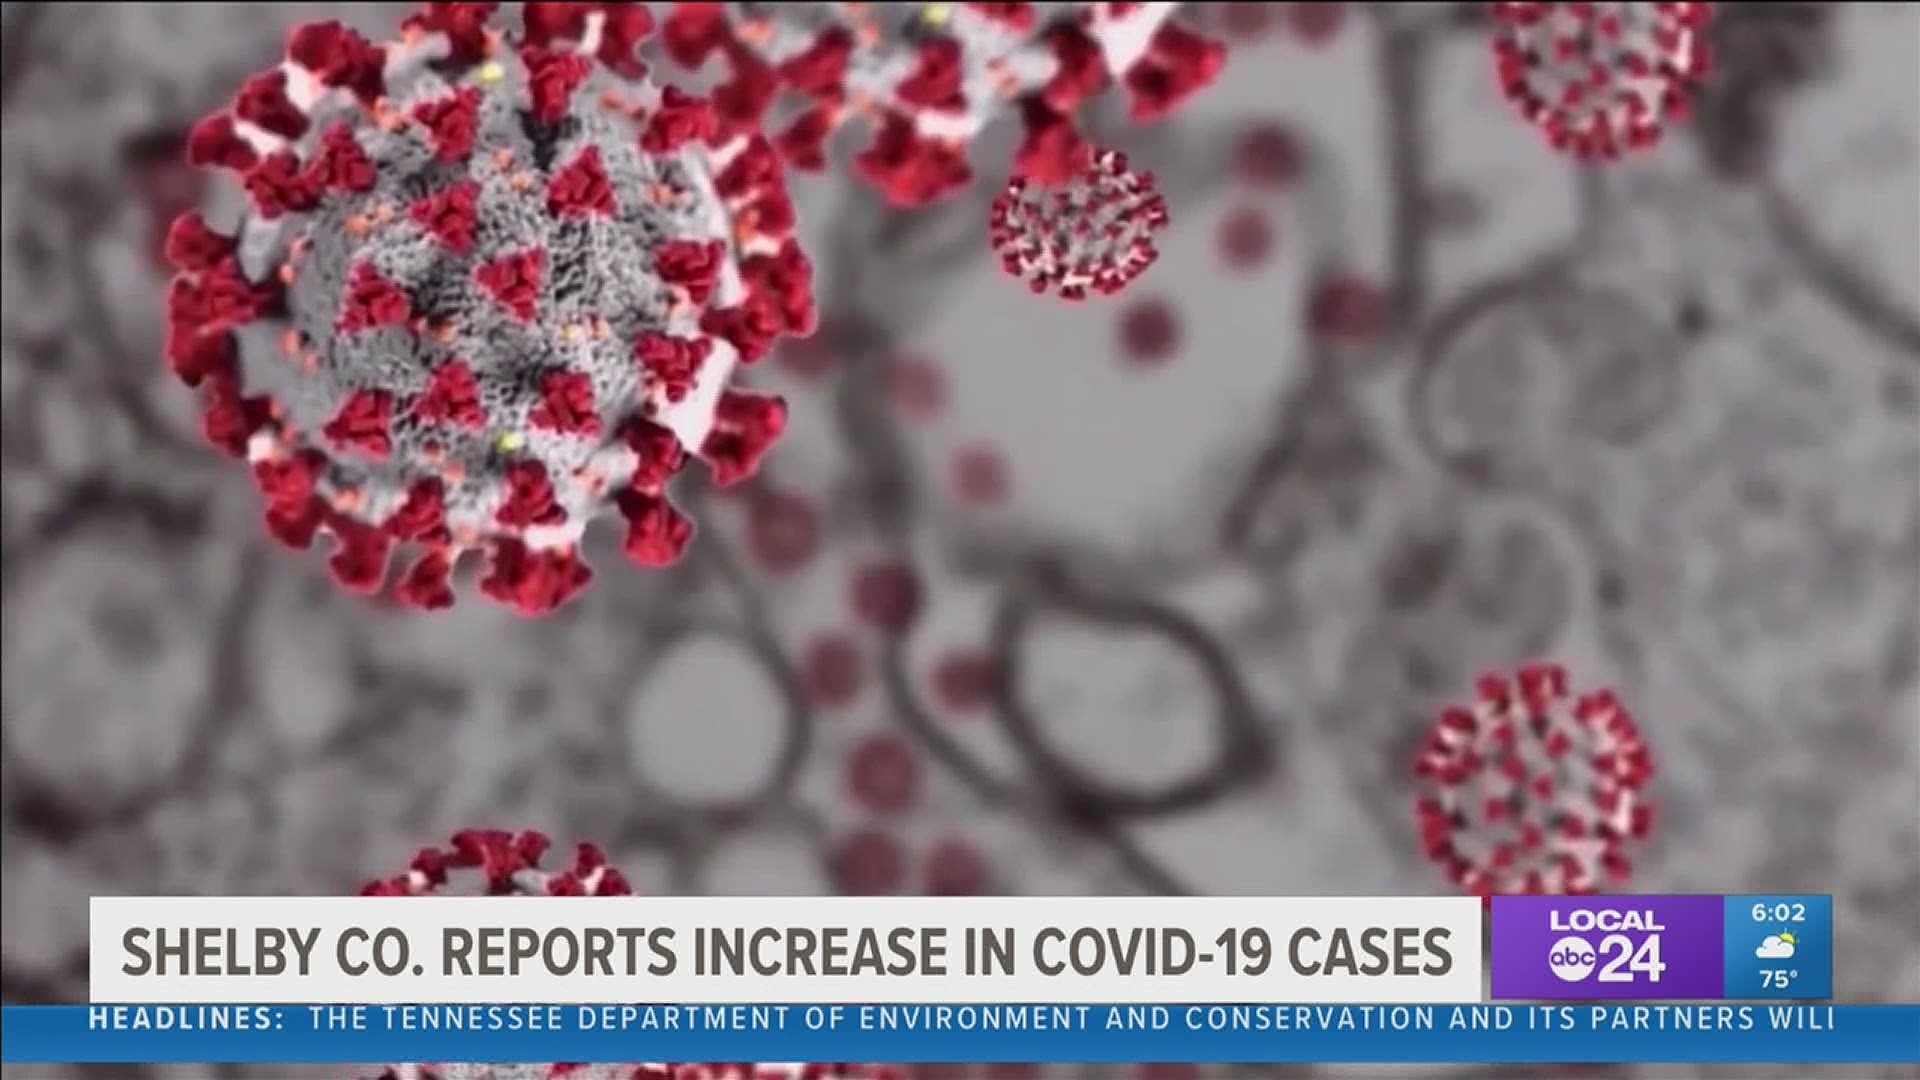 “Whenever the reproductive rate of the virus is above one, we are growing the epidemic,” said David Sweat, Shelby County Health Department Deputy Director.